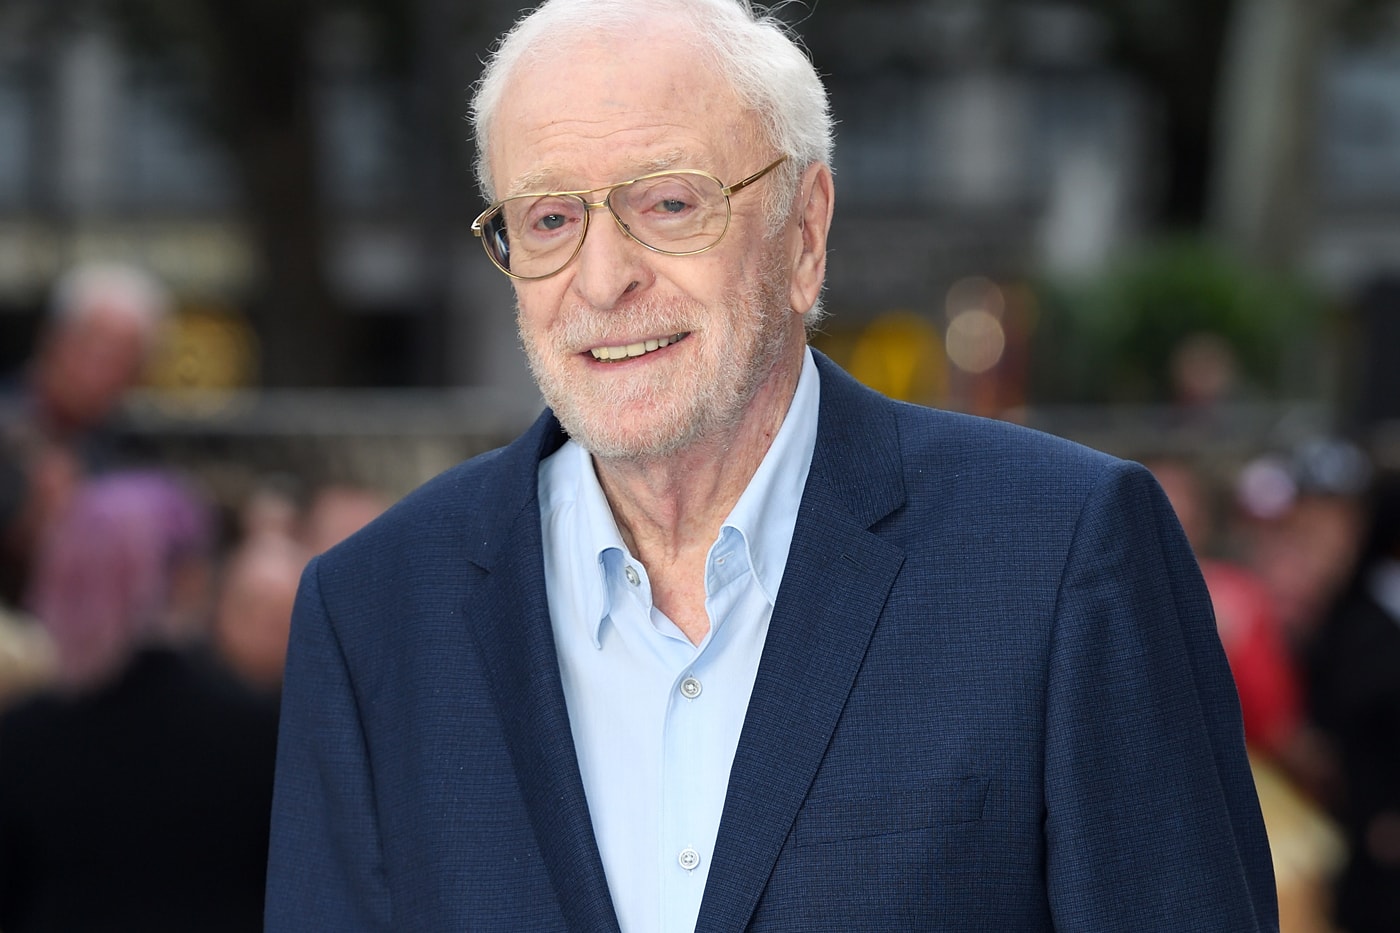 https://image-cdn.hypb.st/https%3A%2F%2Fhypebeast.com%2Fimage%2F2023%2F10%2Fmichael-caine-retires-from-acting-001.jpg?cbr=1&q=90